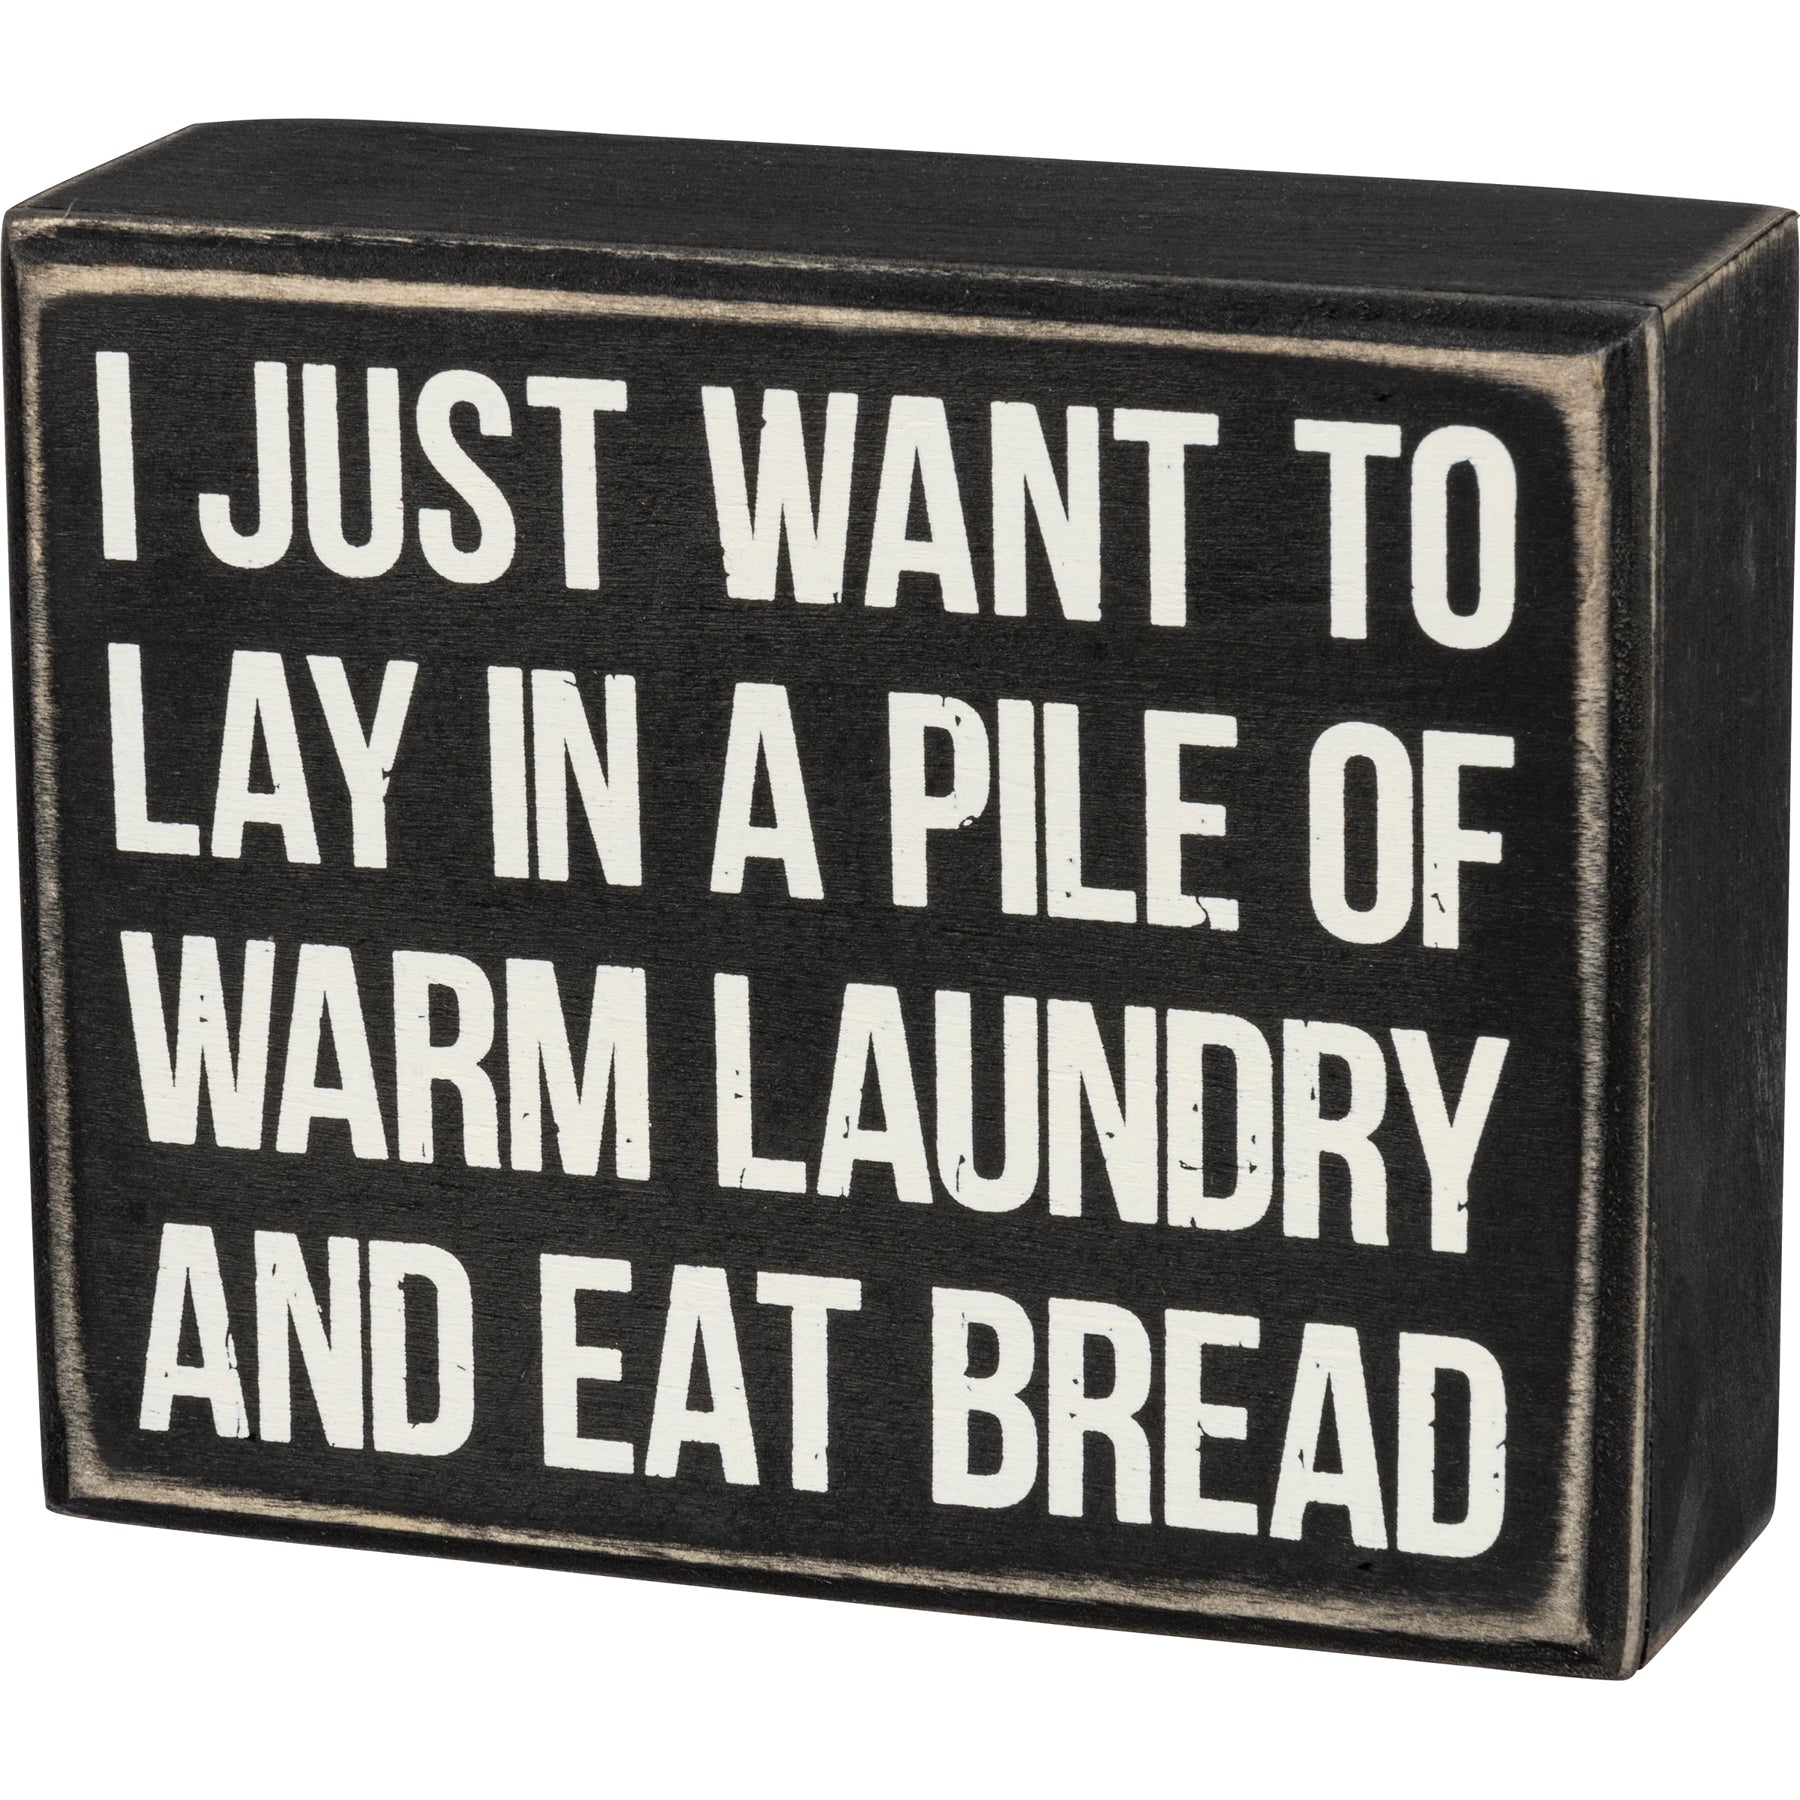 I Just Want To Lay In A Pile Of Warm Laundry And Eat Bread Box Sign in Black with White Lettering